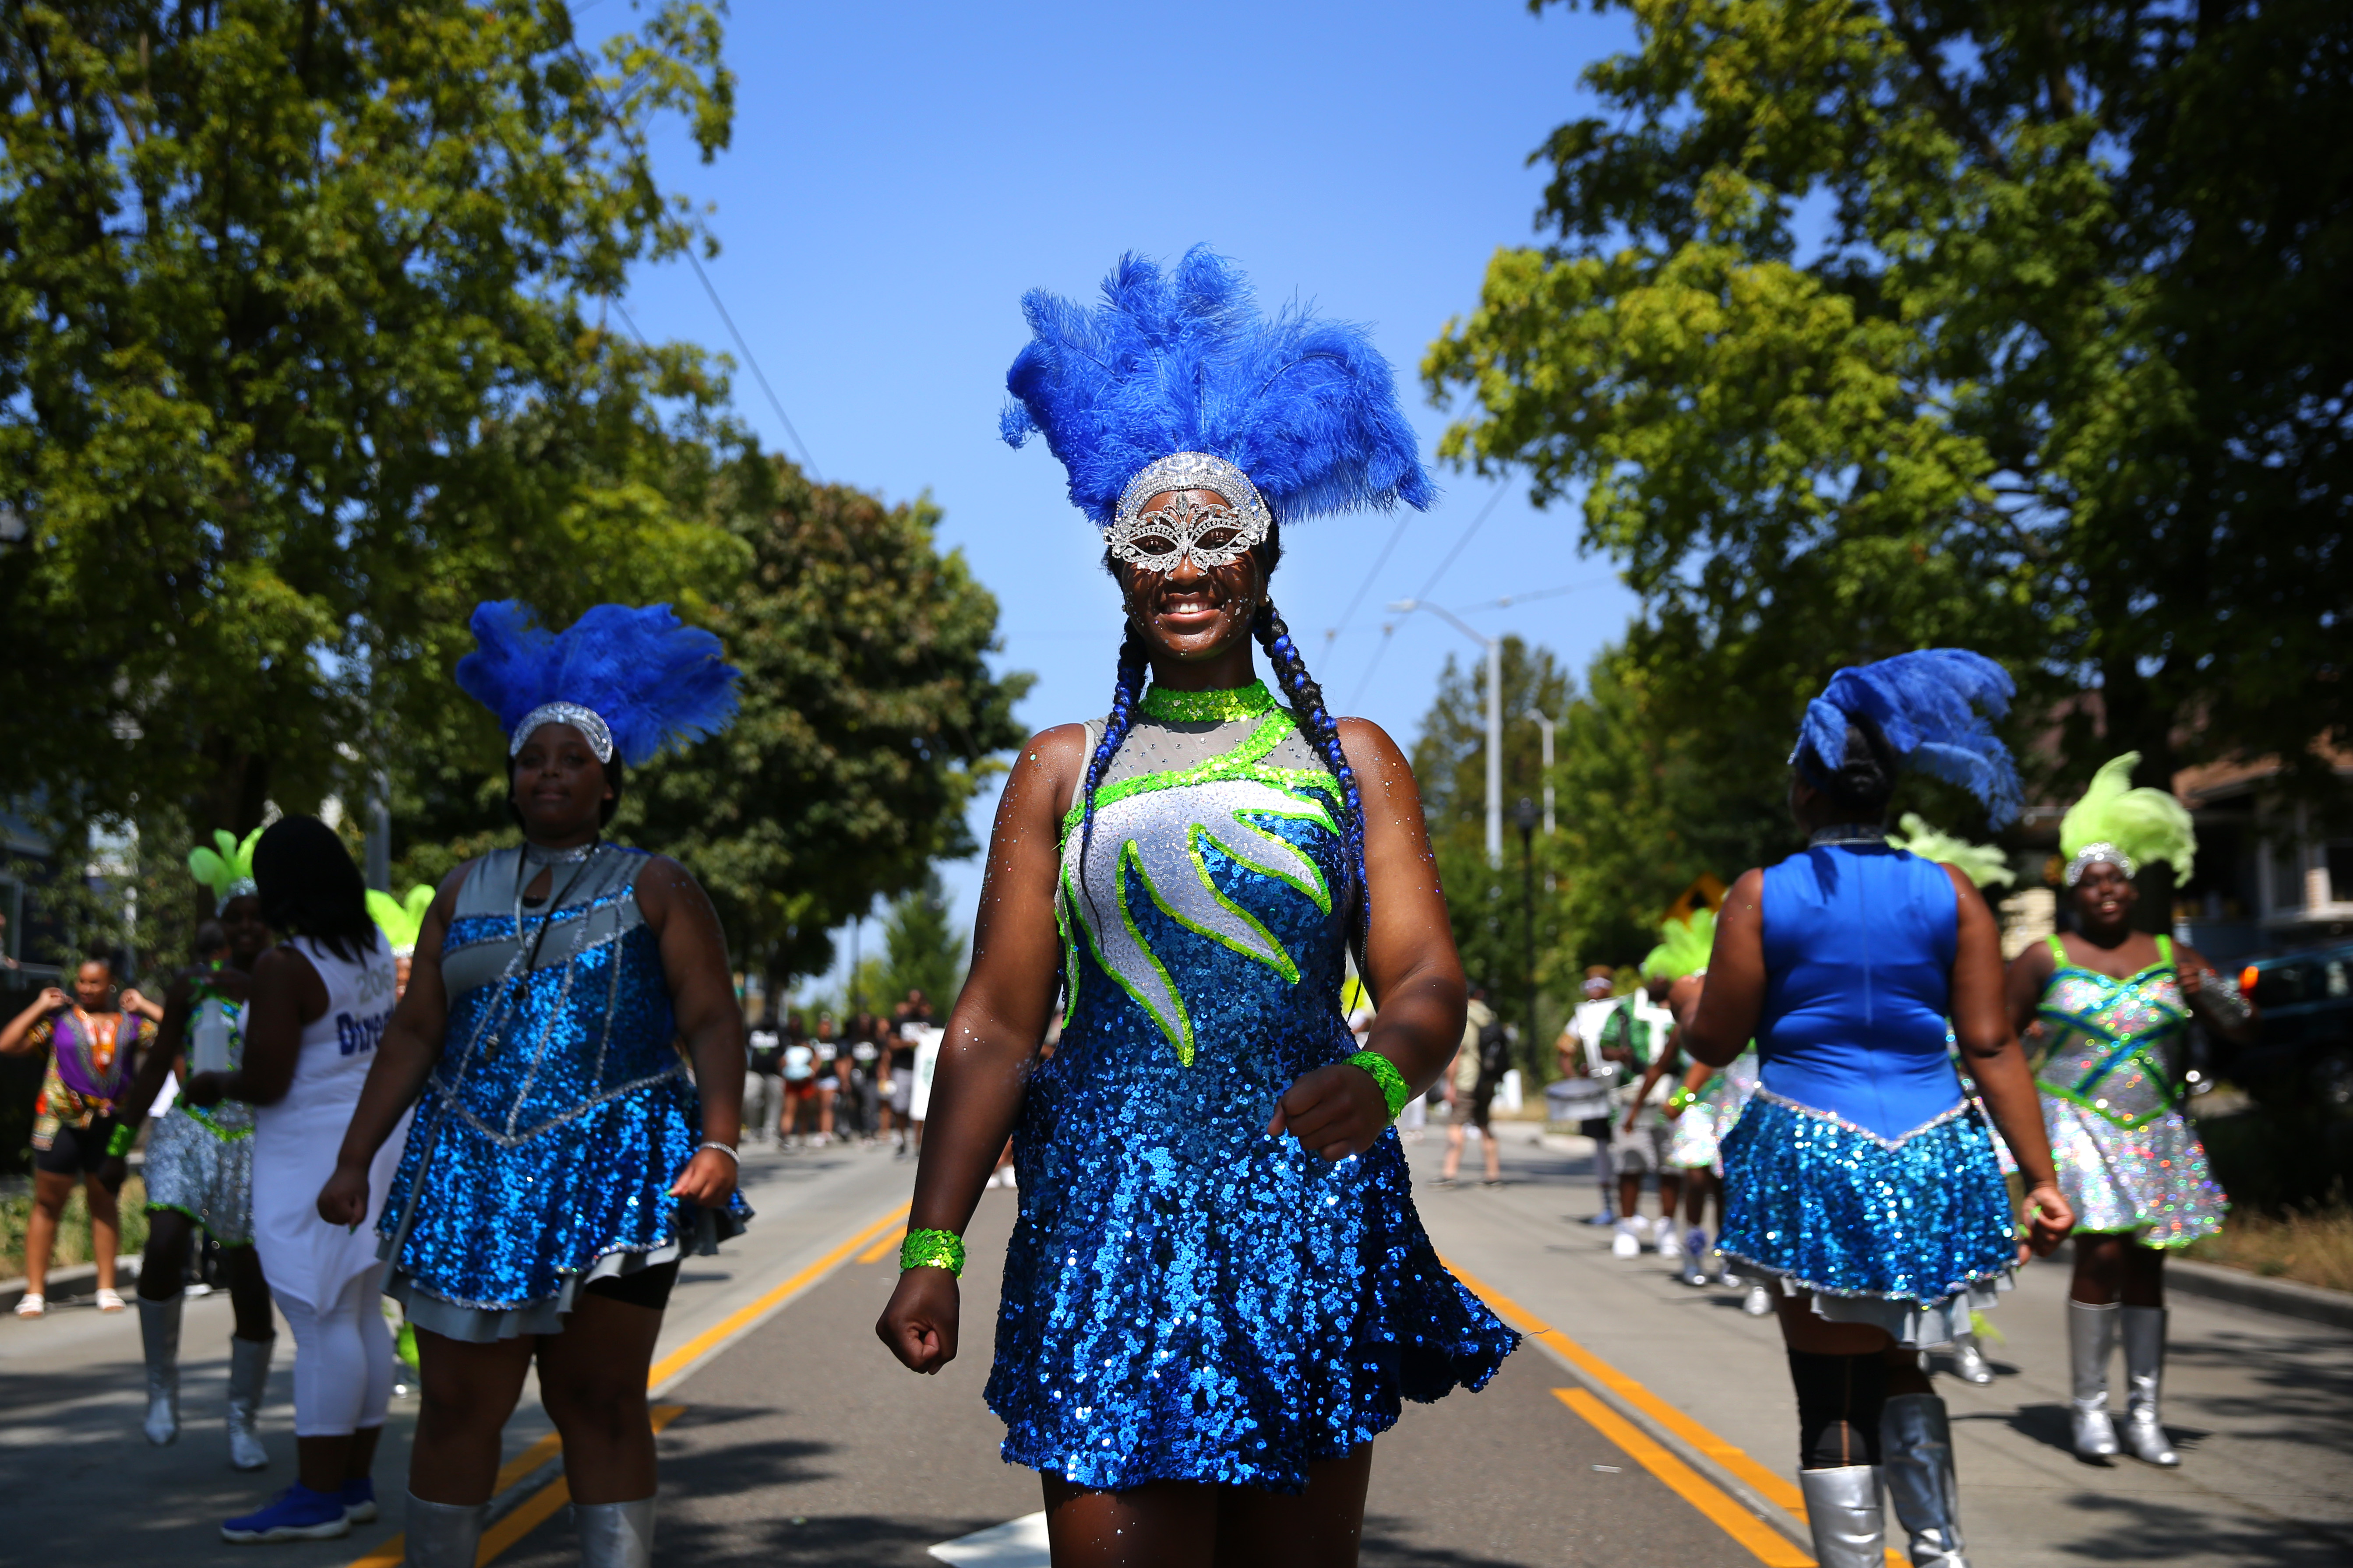 Three African American women in royal blue and green glittering costumes march down the main thoroughfare during a heritage parade in Seattle.